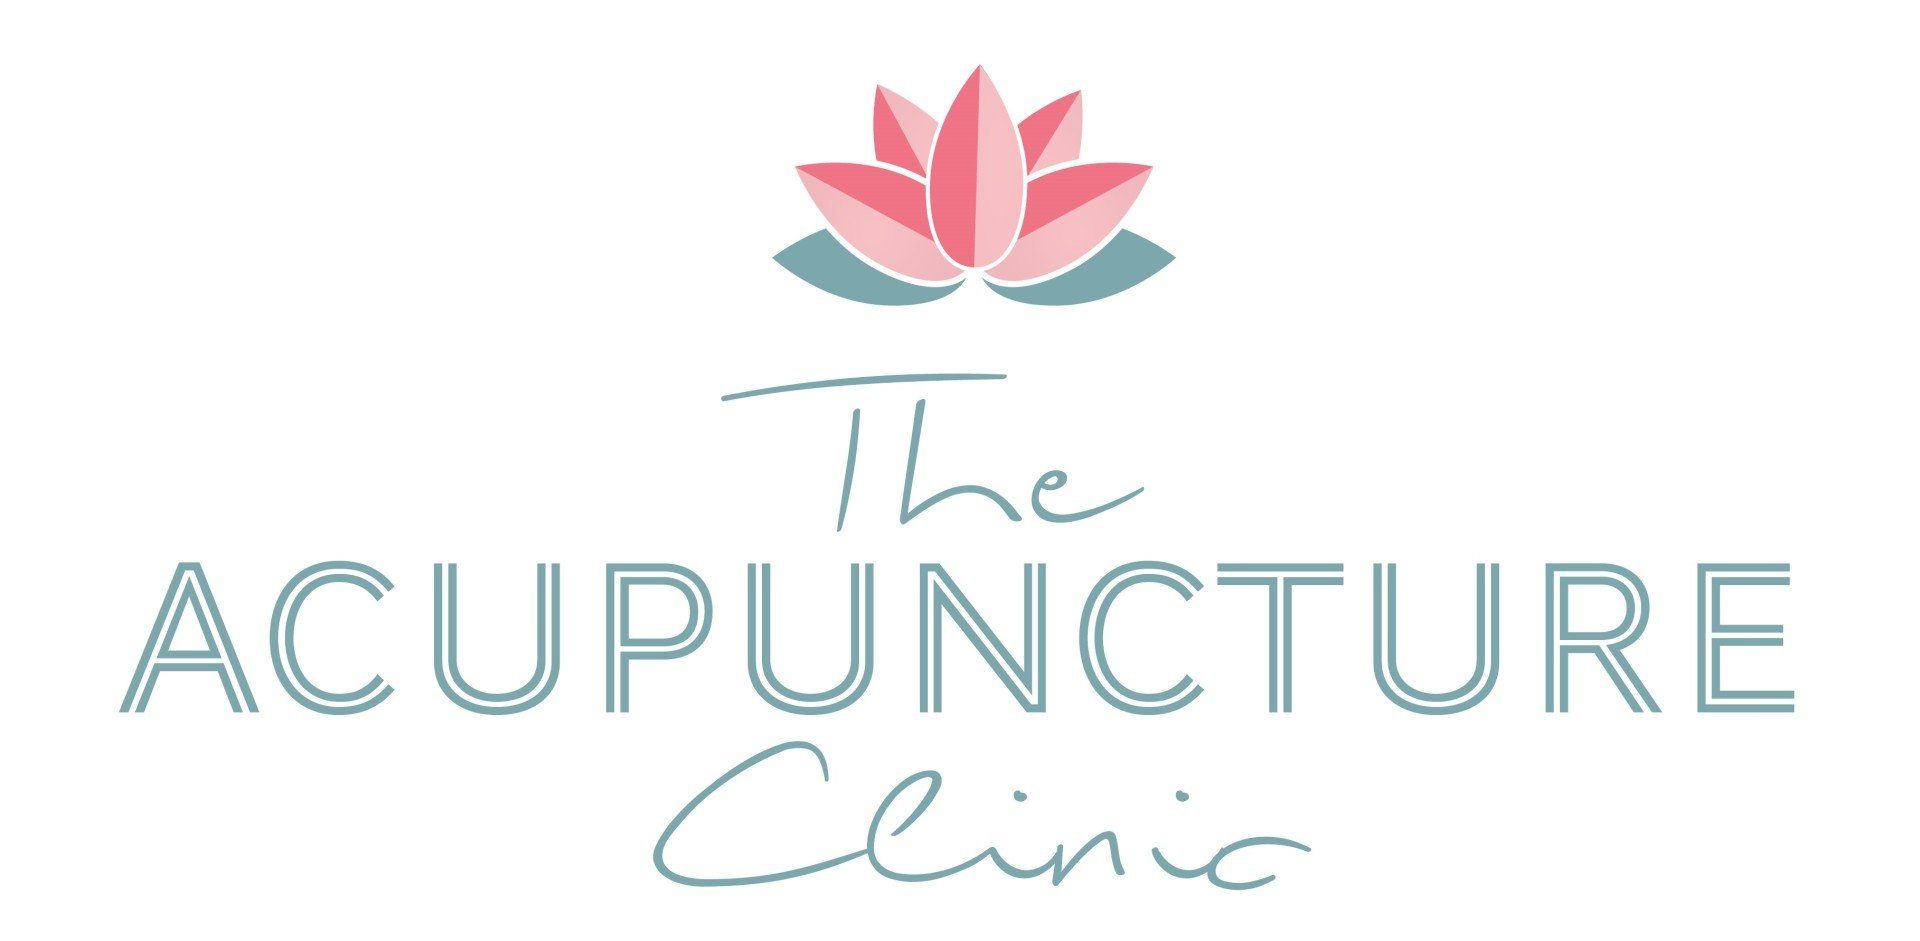 The Acupuncture Clinic Marlow